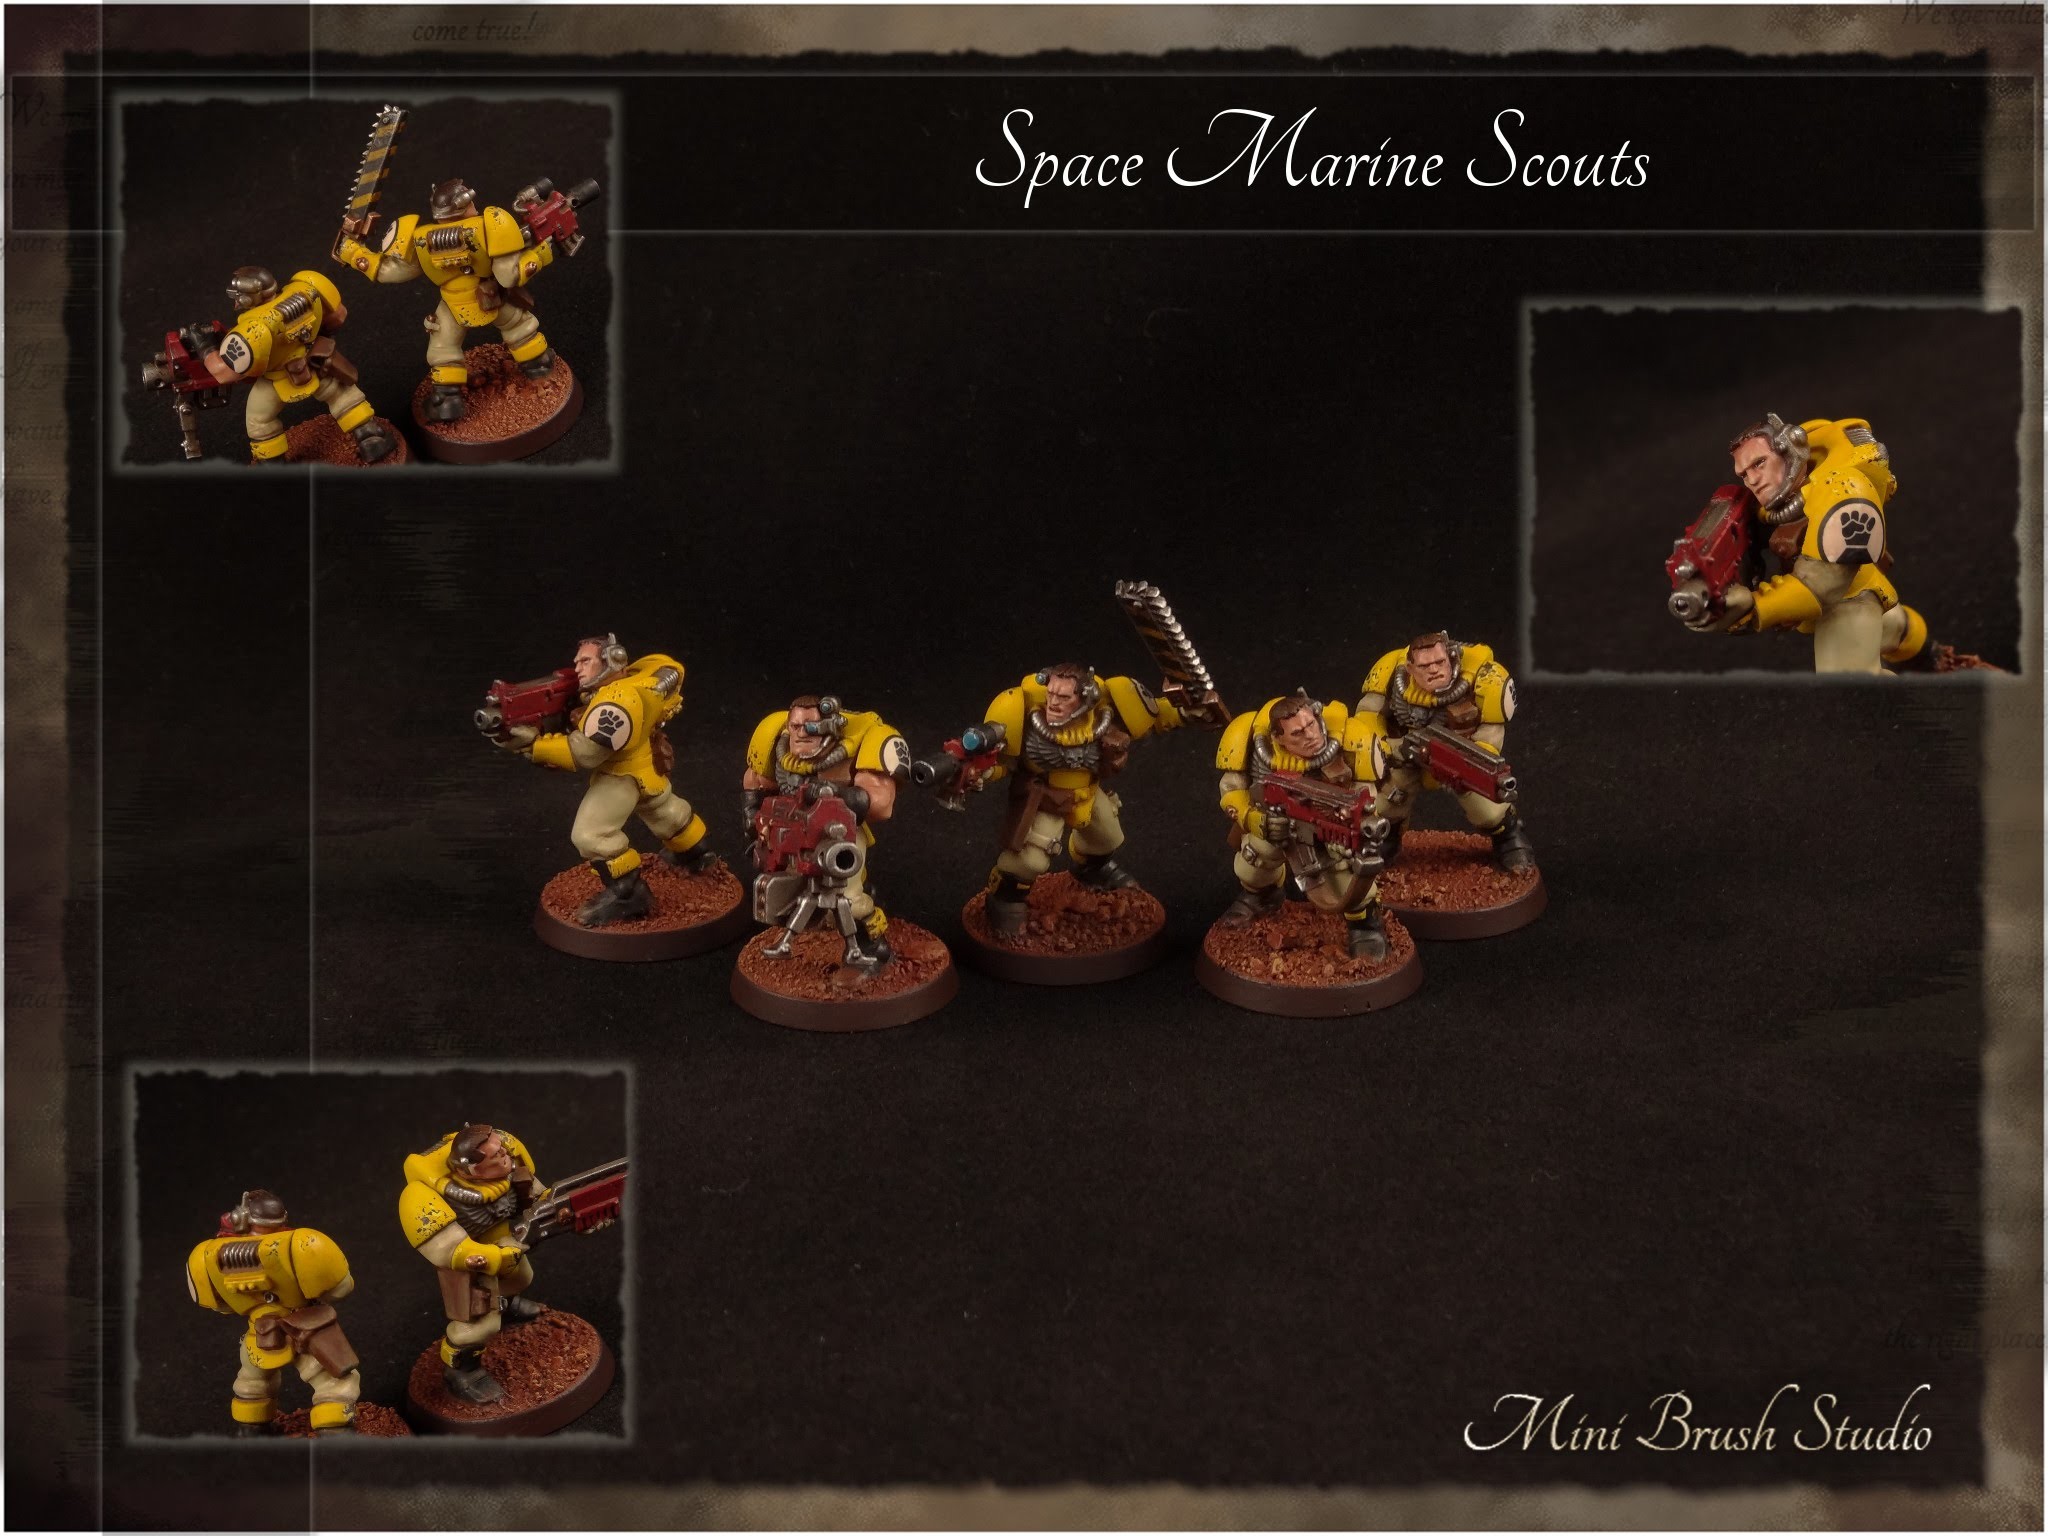 2048x1536 Warhammer 40k - Space Marine Scouts ( Imperial Fists )